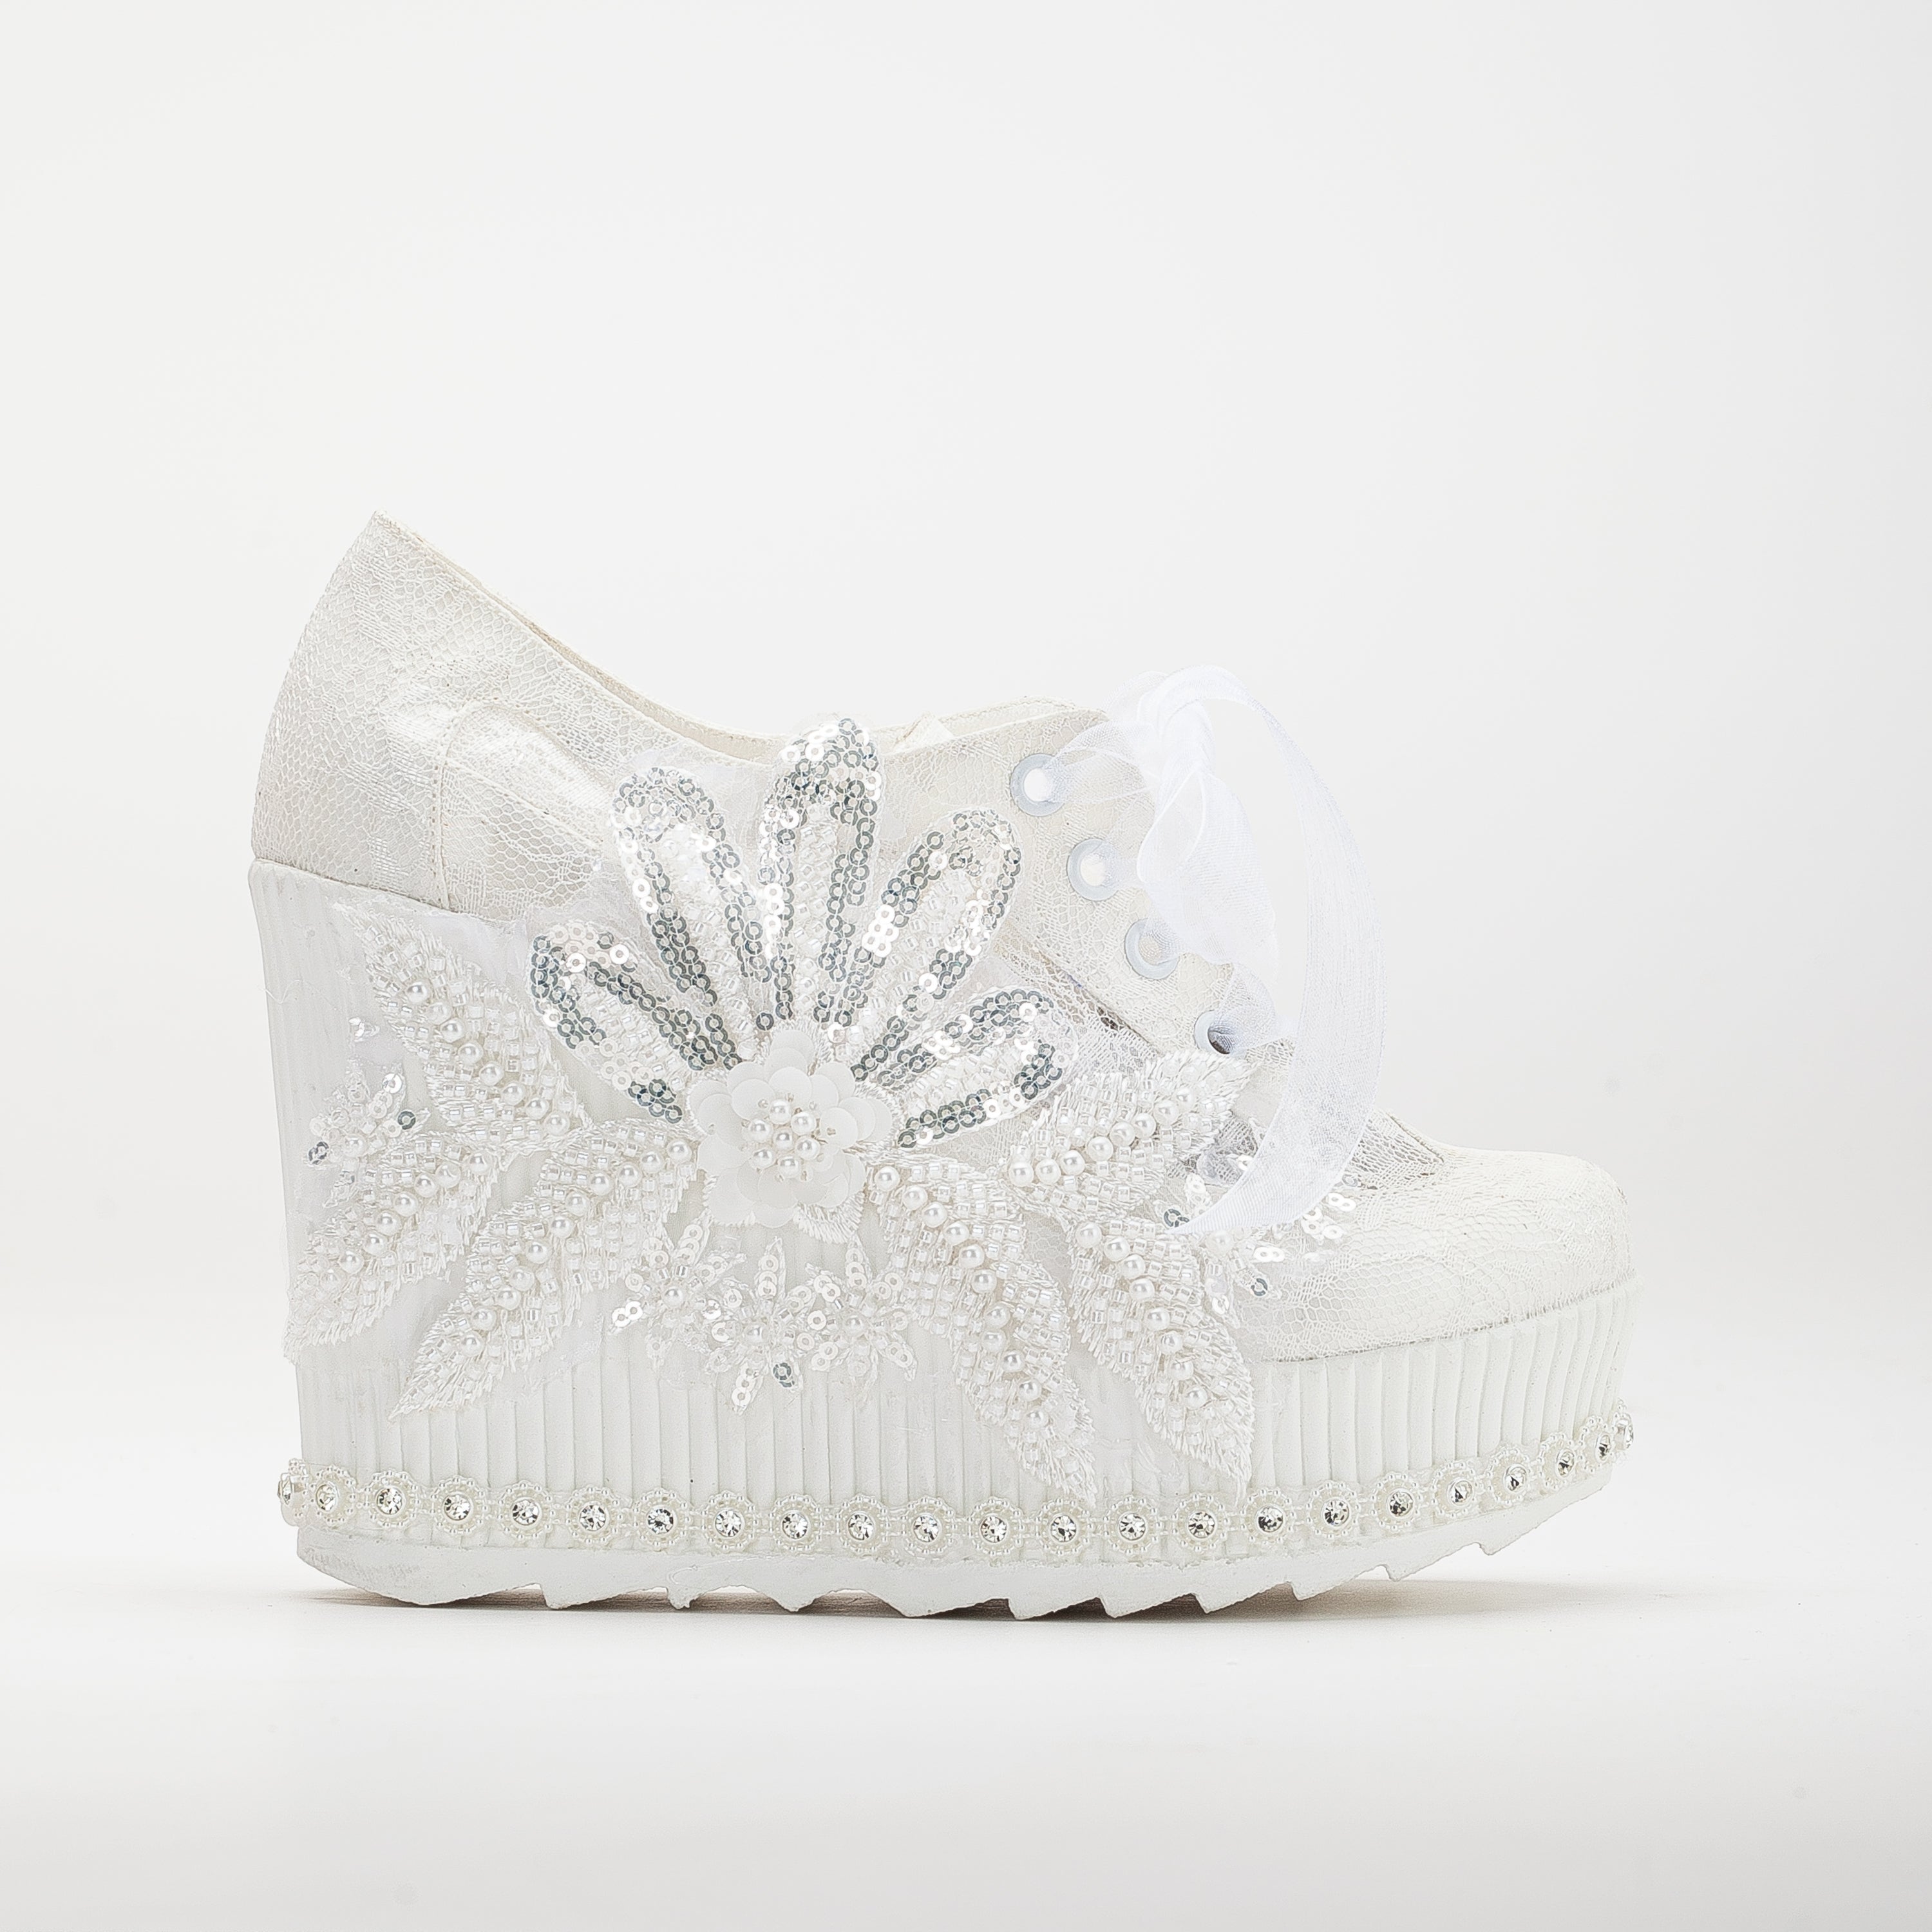 Lace wedding sneakers, Bridal lace sneakers, White lace bridal sneakers, Lace wedding tennis shoes, Lace embellished wedding sneakers, Lace bridal trainers, Wedding sneakers with lace detail, Lace bridal kicks, Lace wedding athletic shoes, Lace wedding sneakers for brides